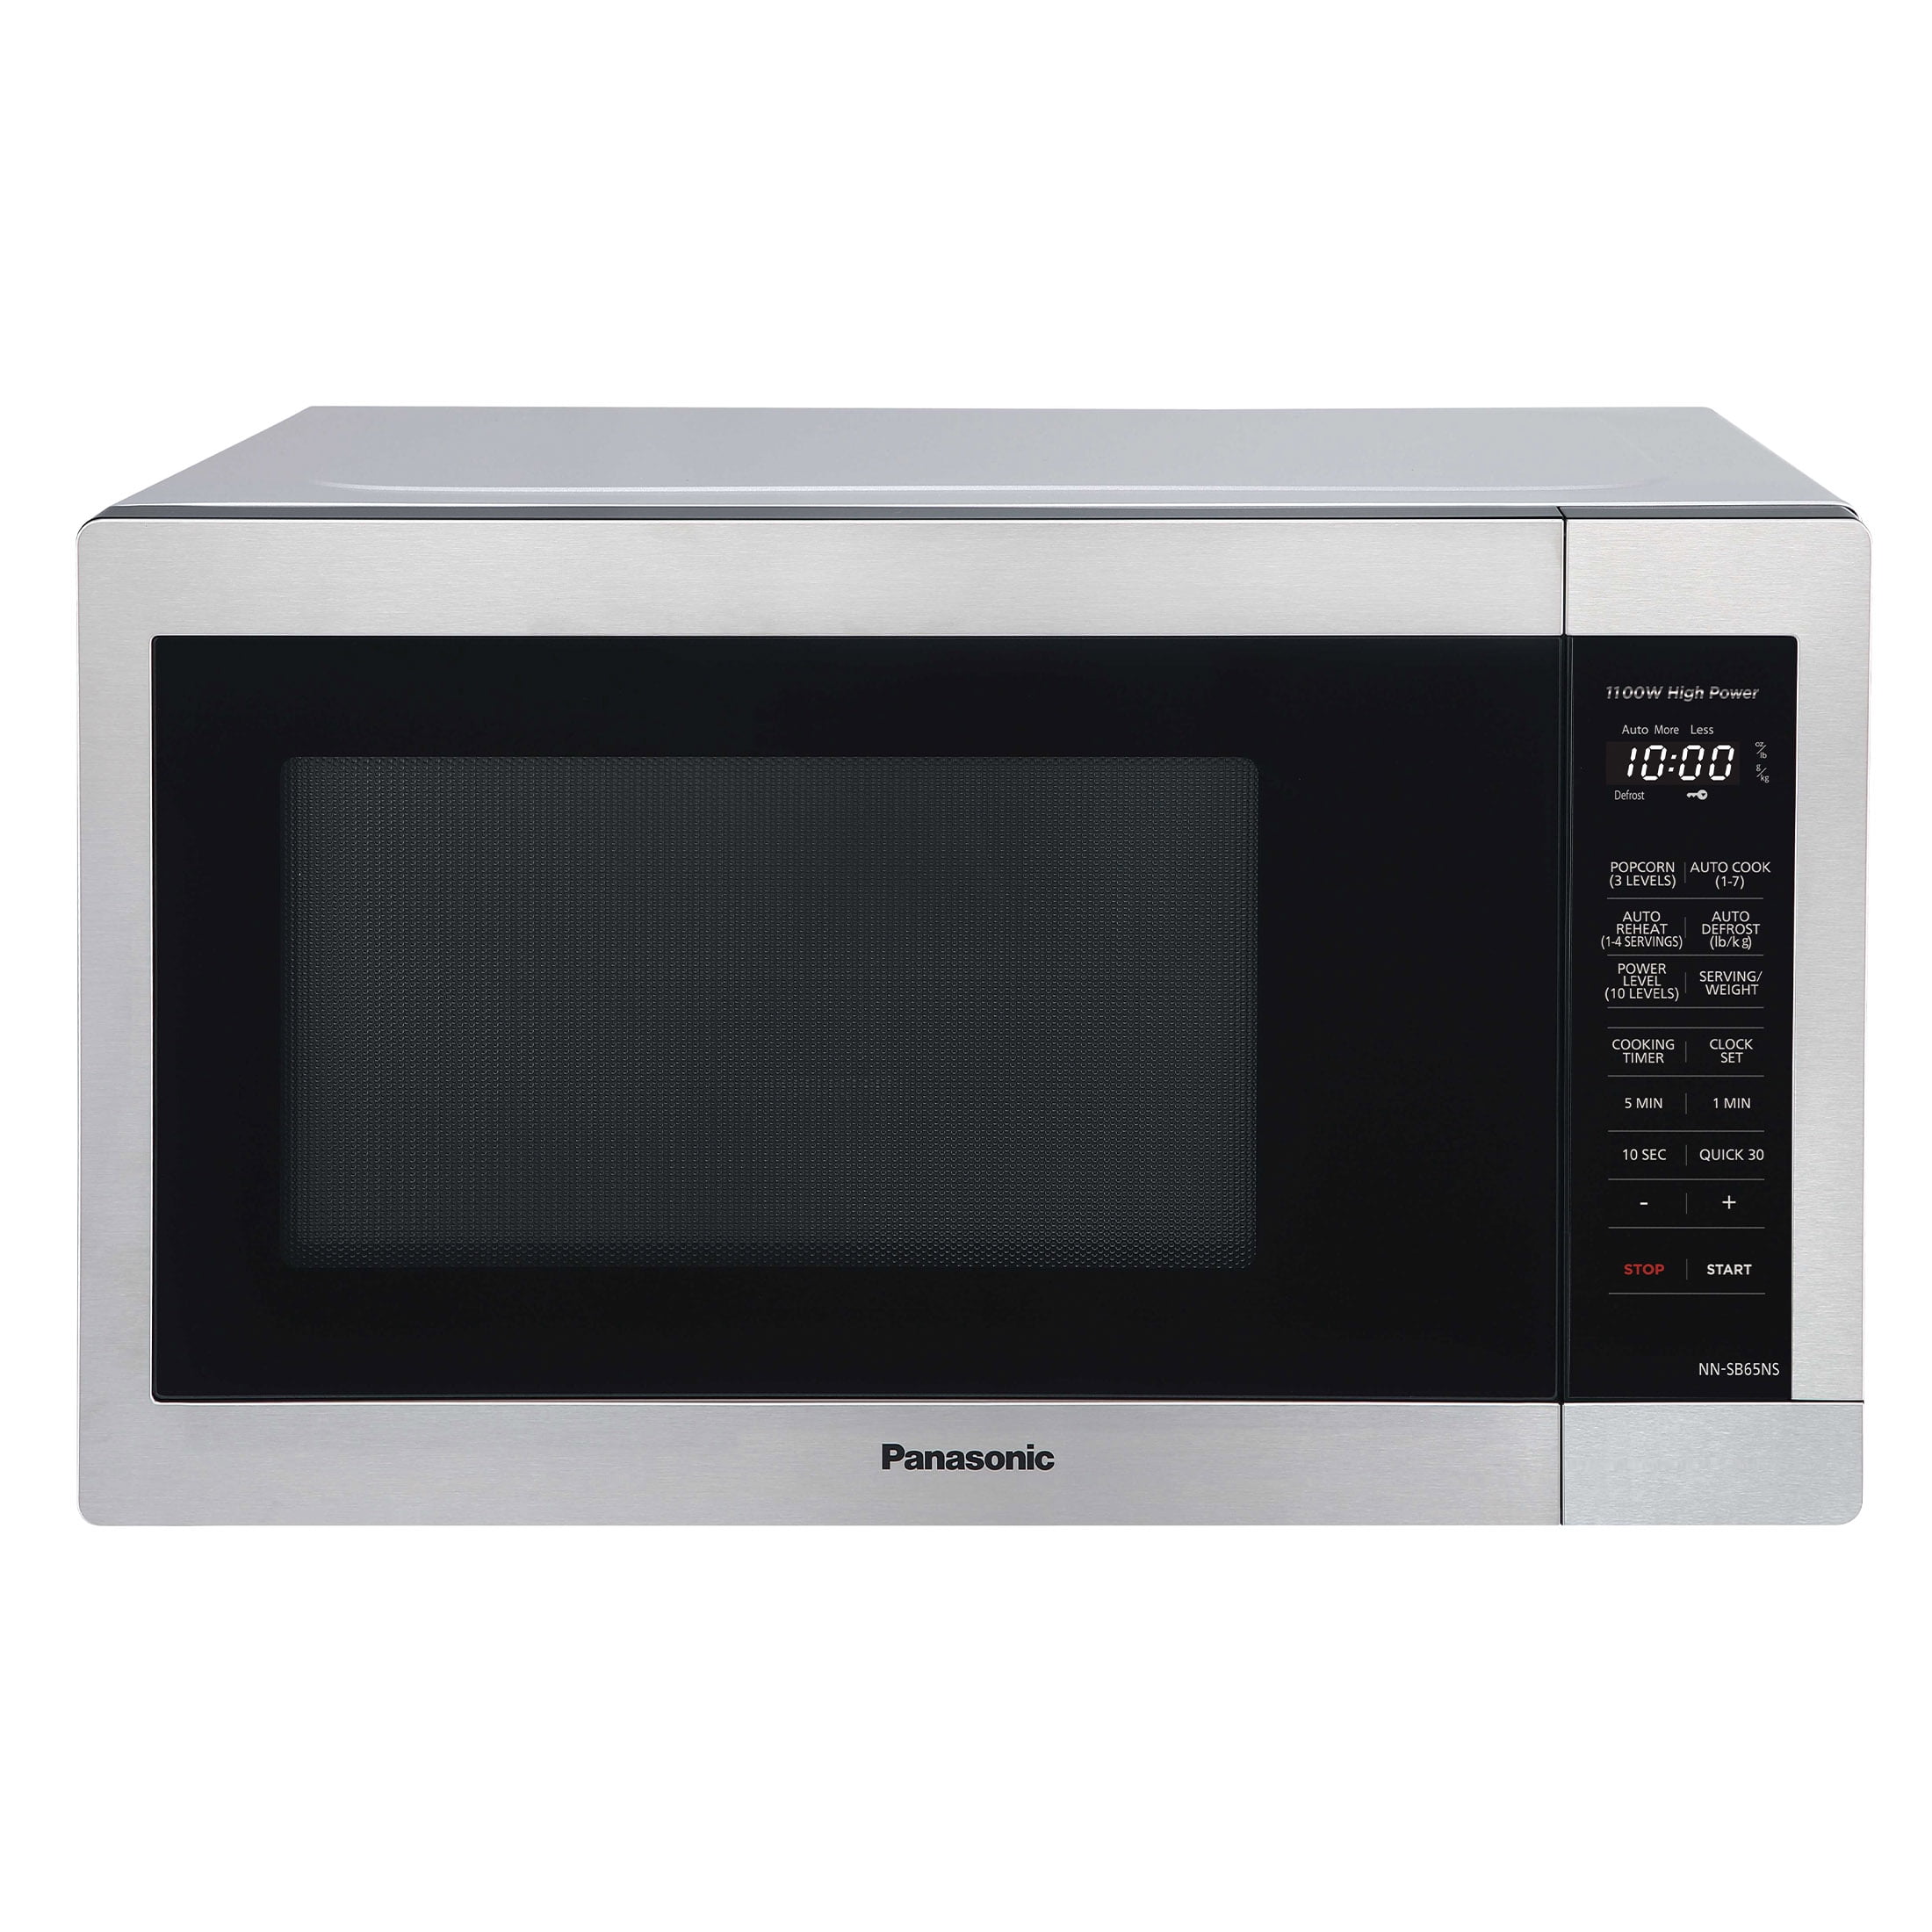 Commercial Chef Small Countertop Microwave With Digital Display 0.7 Cu. Ft.  Black - Office Depot